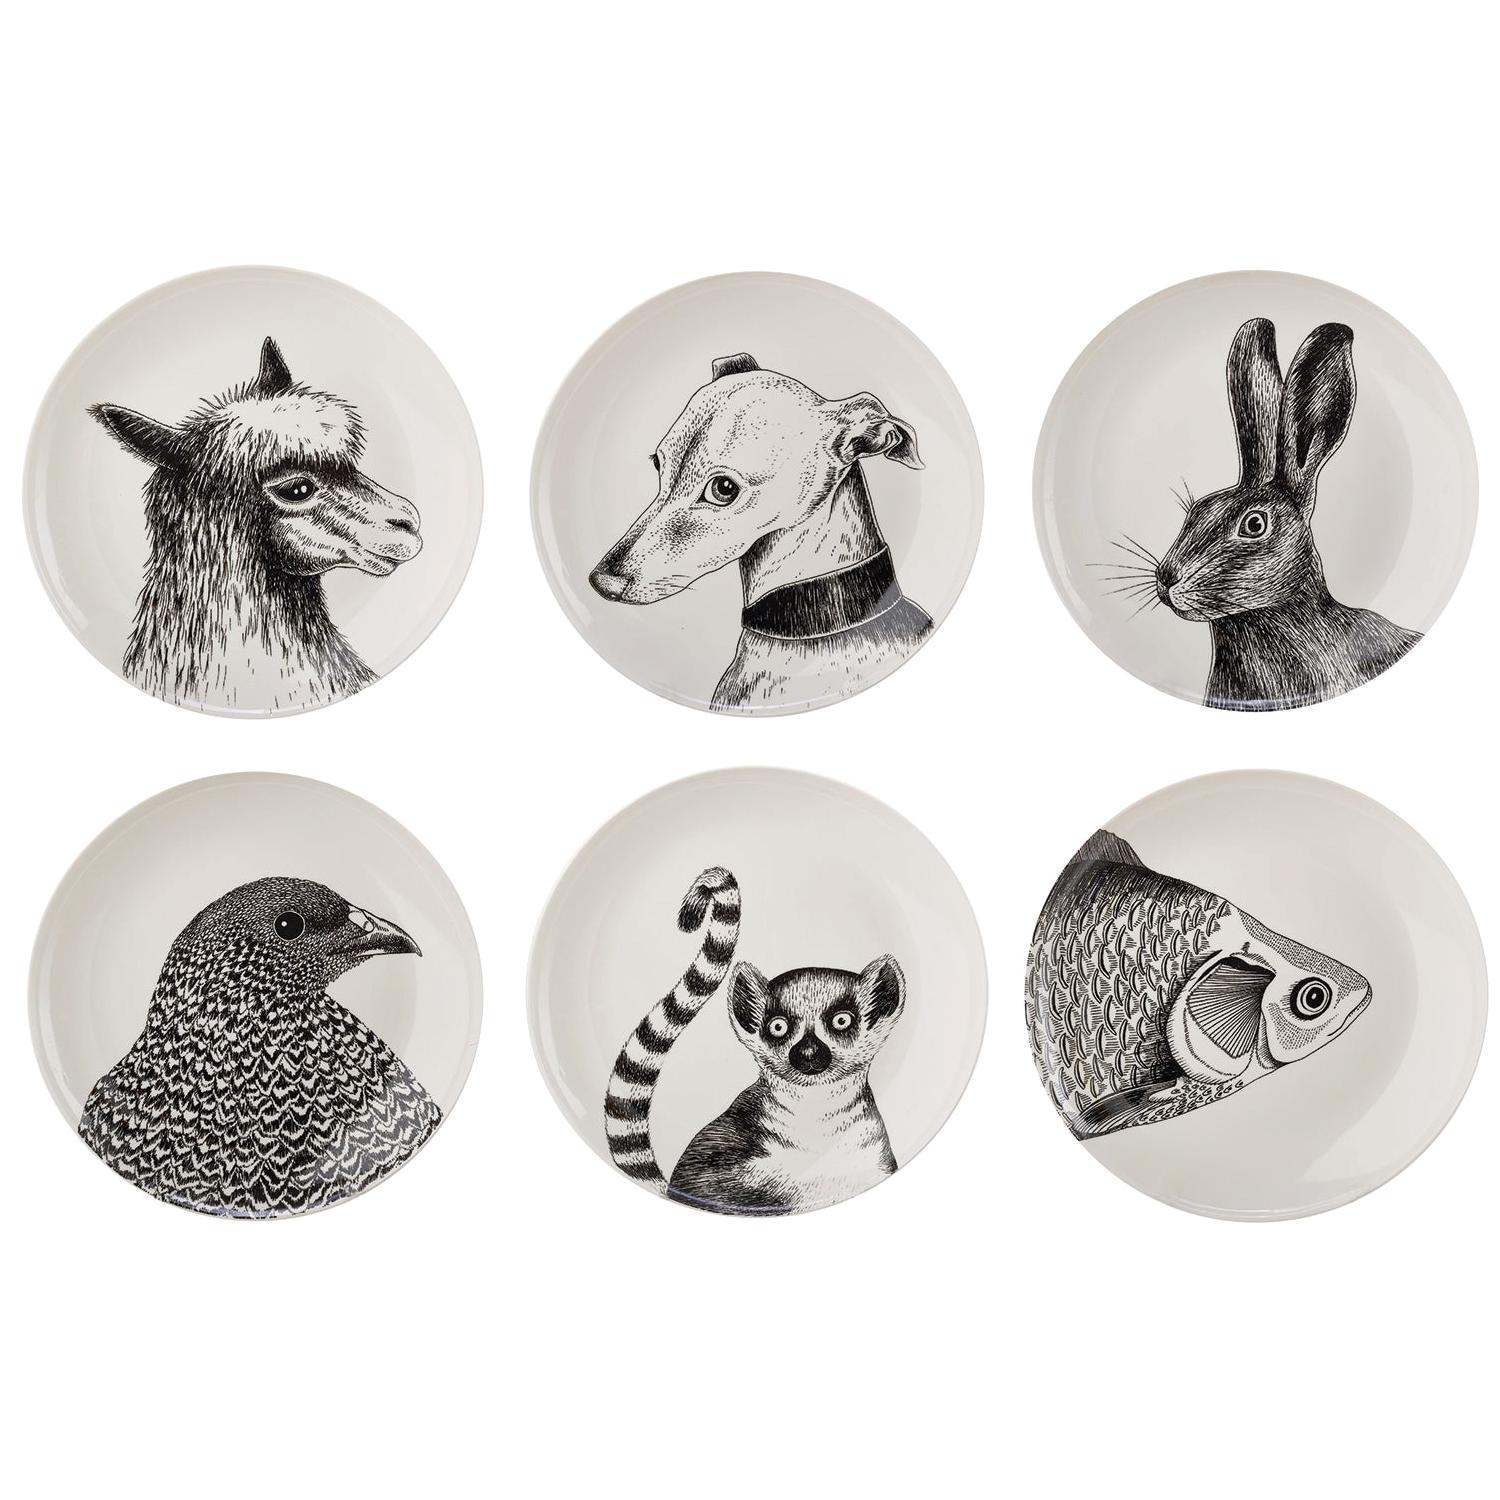 Porcelain Dinner Plates with Animal Portrait Decals